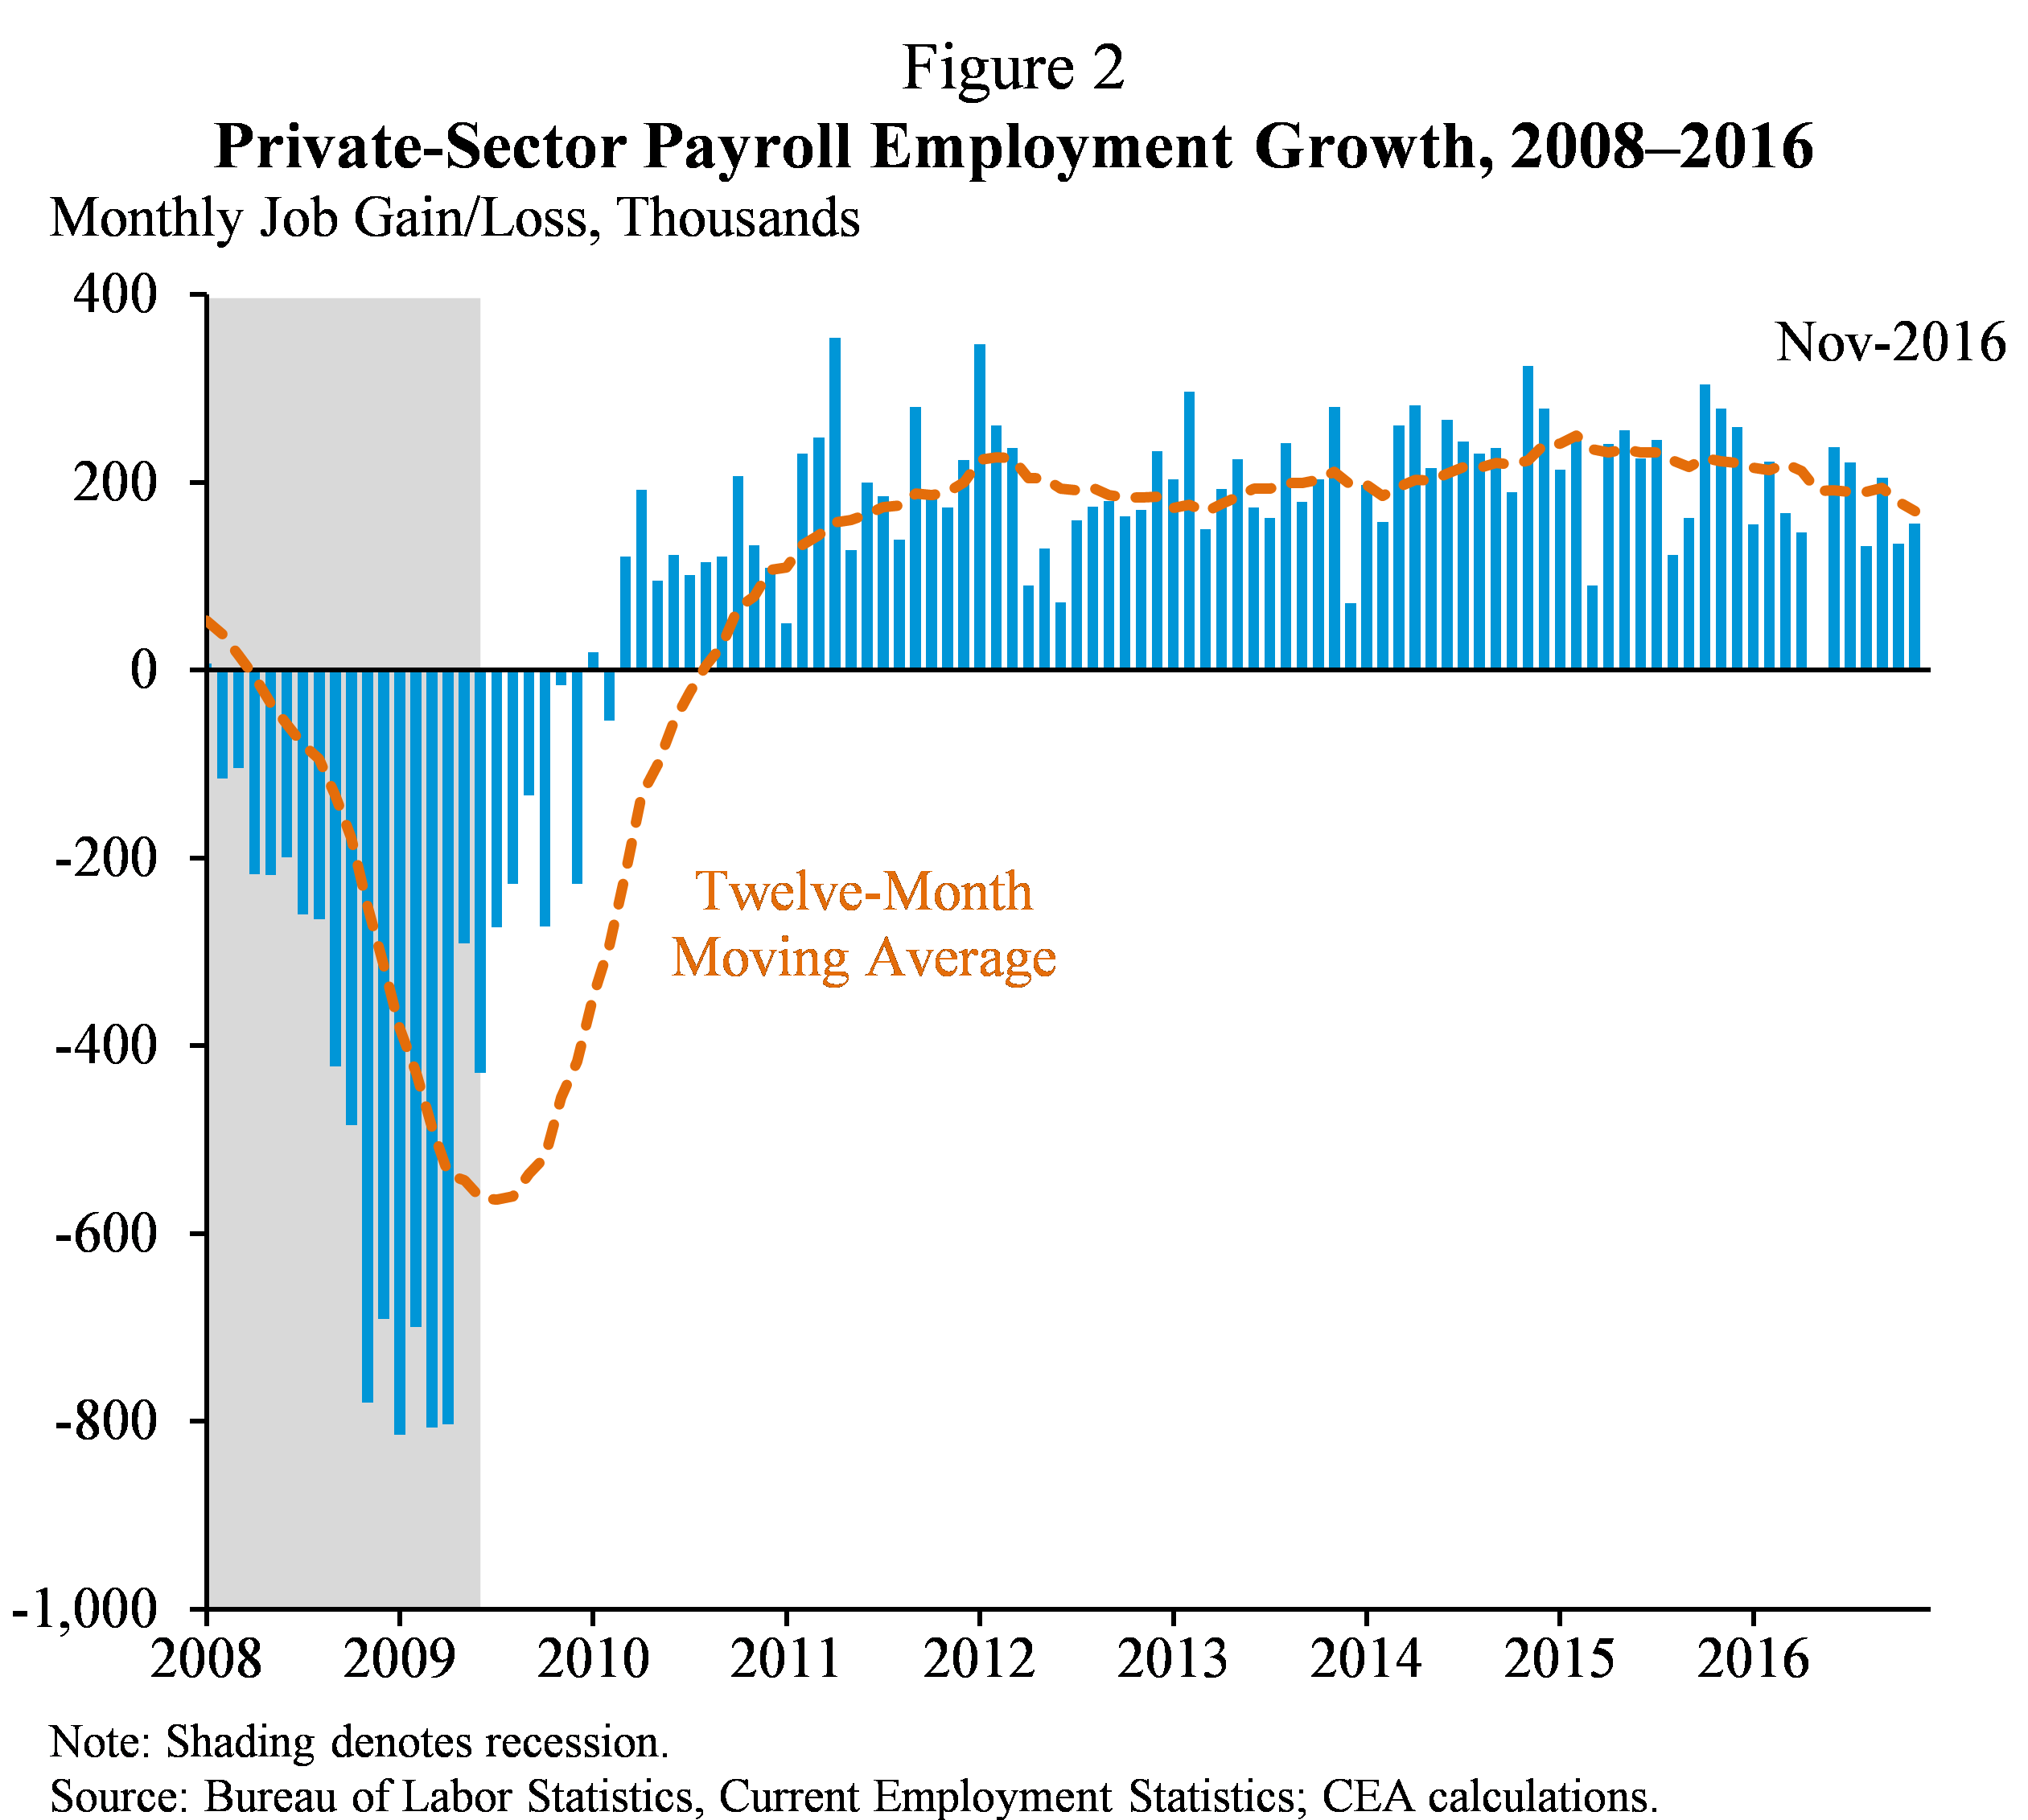 Figure 2.  Private-Sector Payroll Employment Growth, 2008-2016